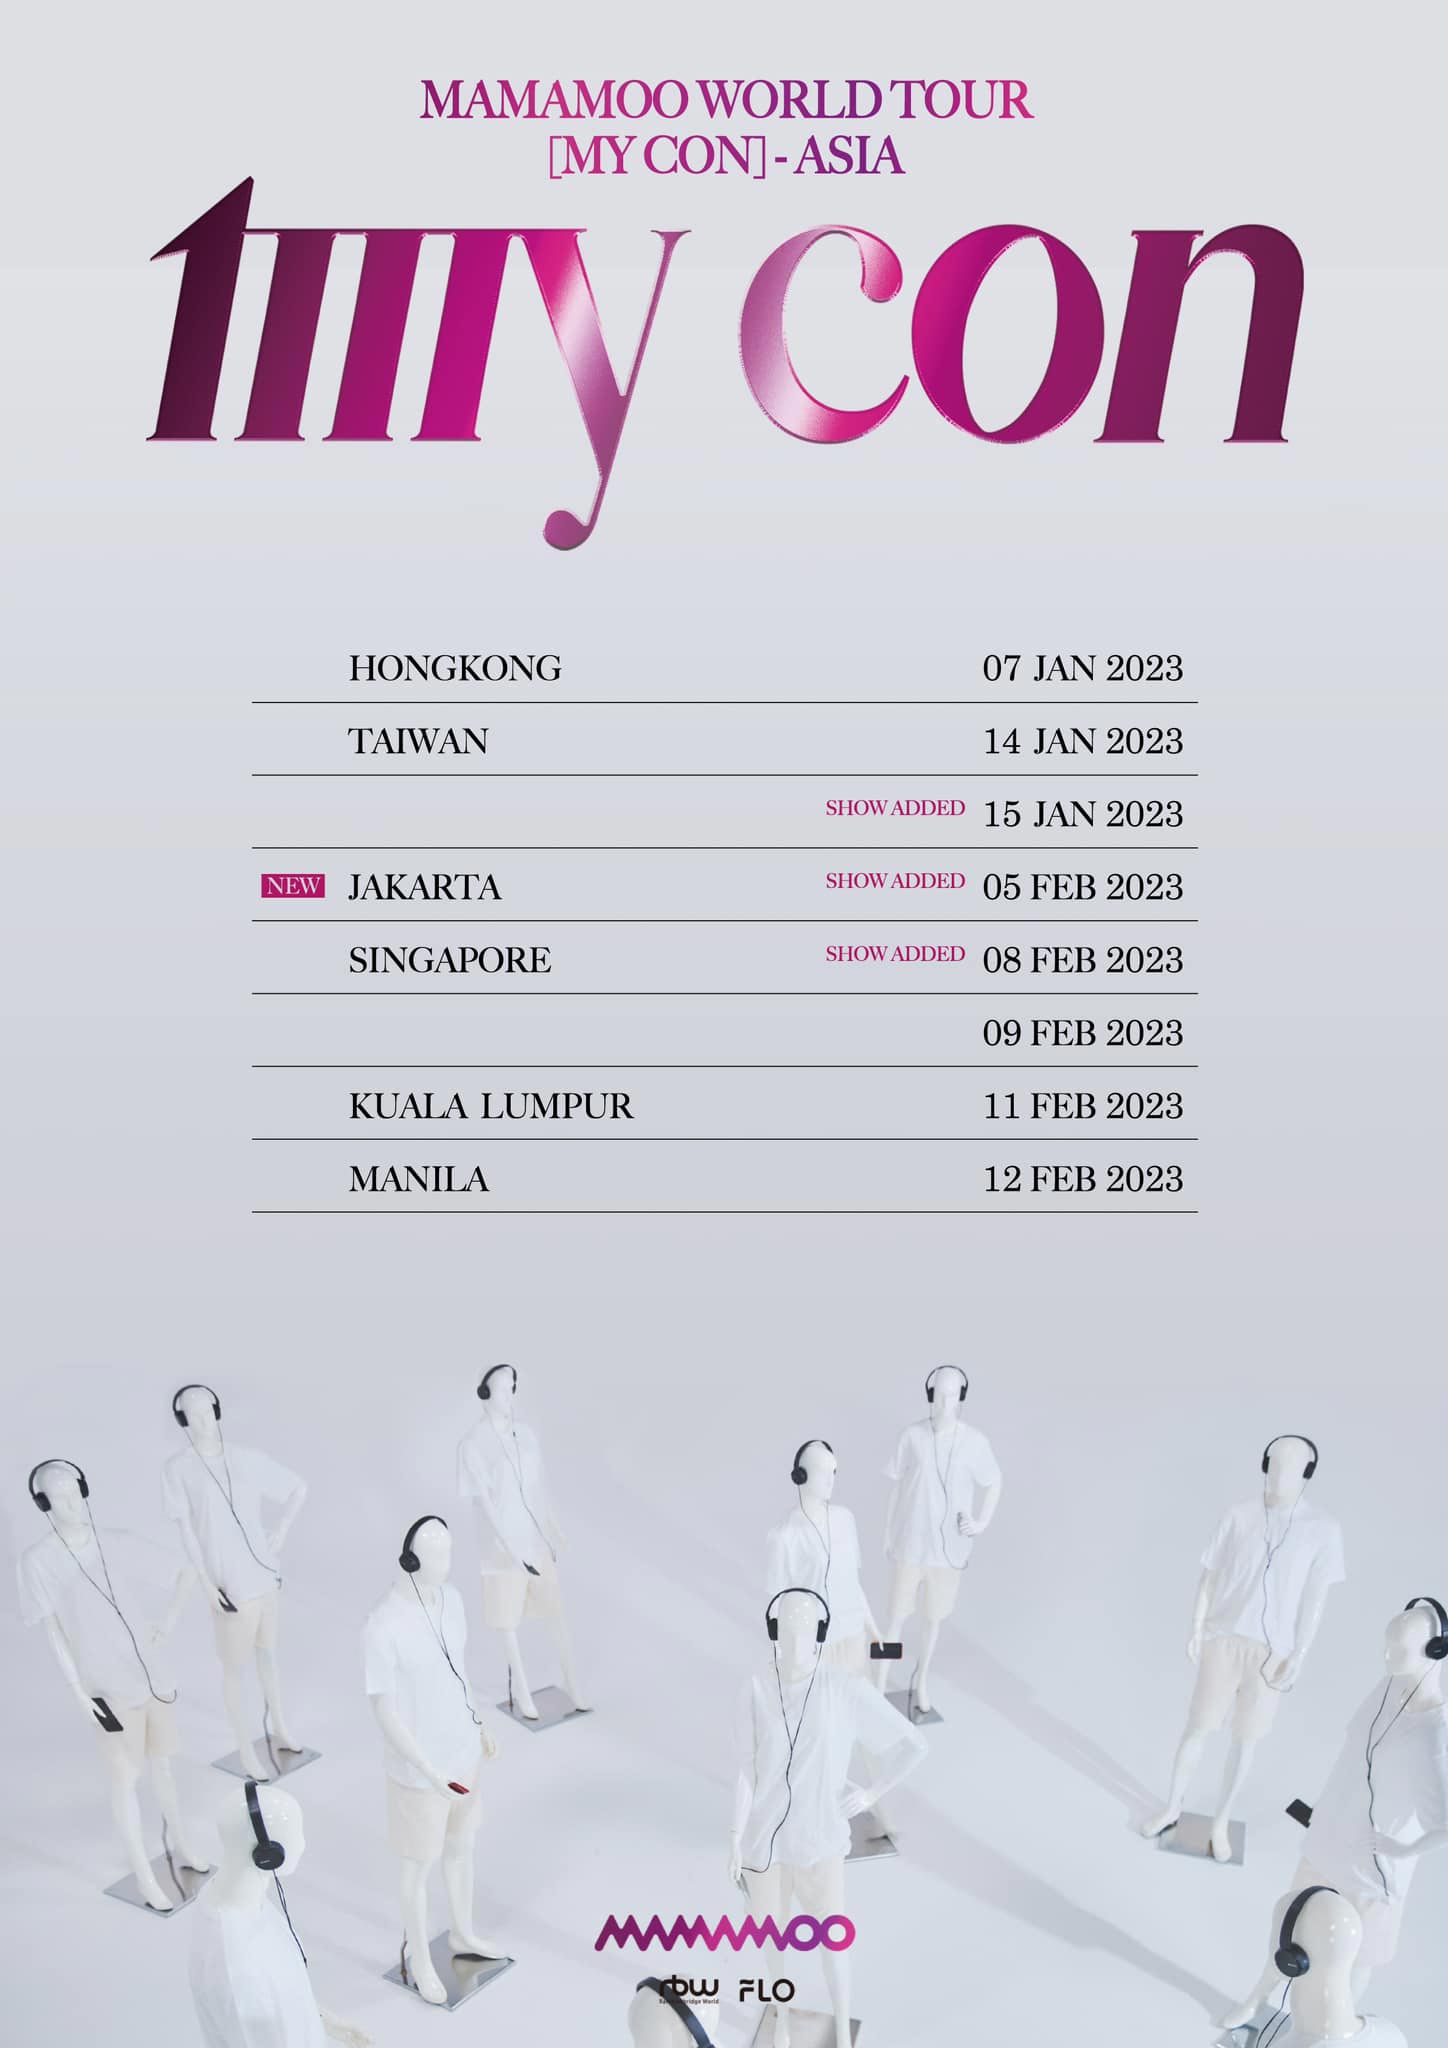 MAMAMOO Concert & World Tour "MY CON" Schedule 2023